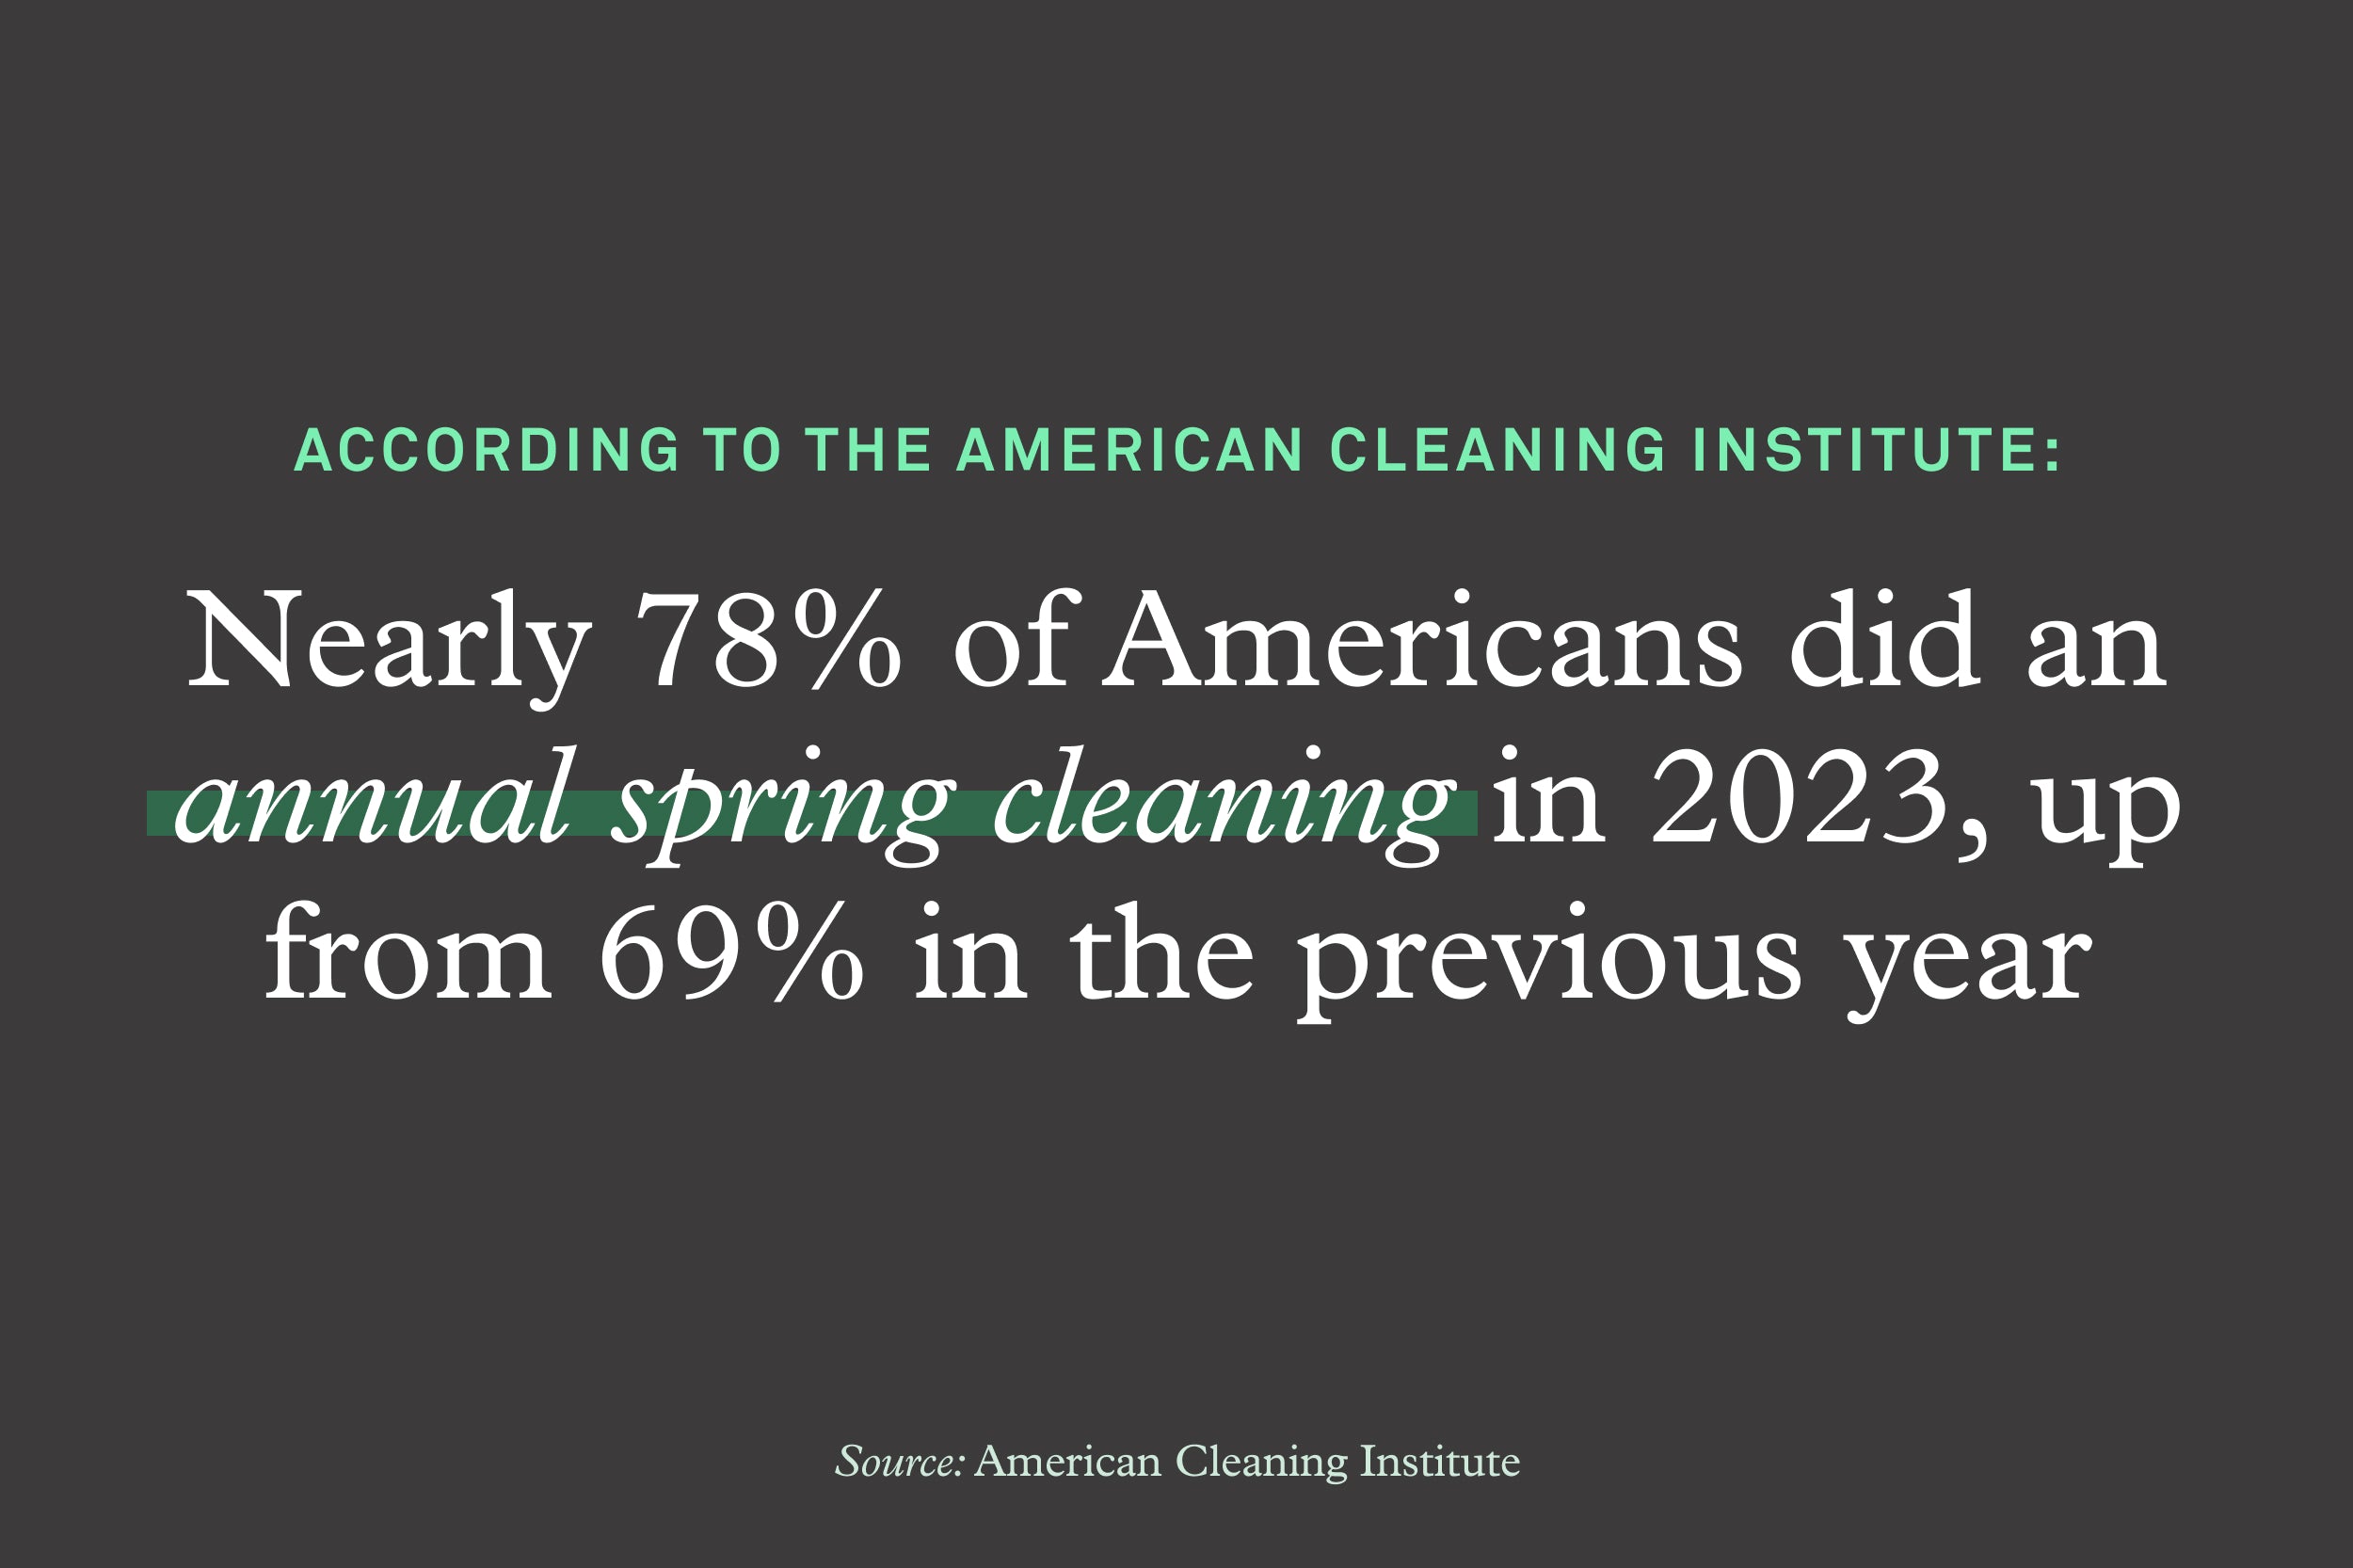 A blowout quote that says: "Nearly 78% of Americans did an annual spring cleaning in 2023, up from 69% in the previous year."